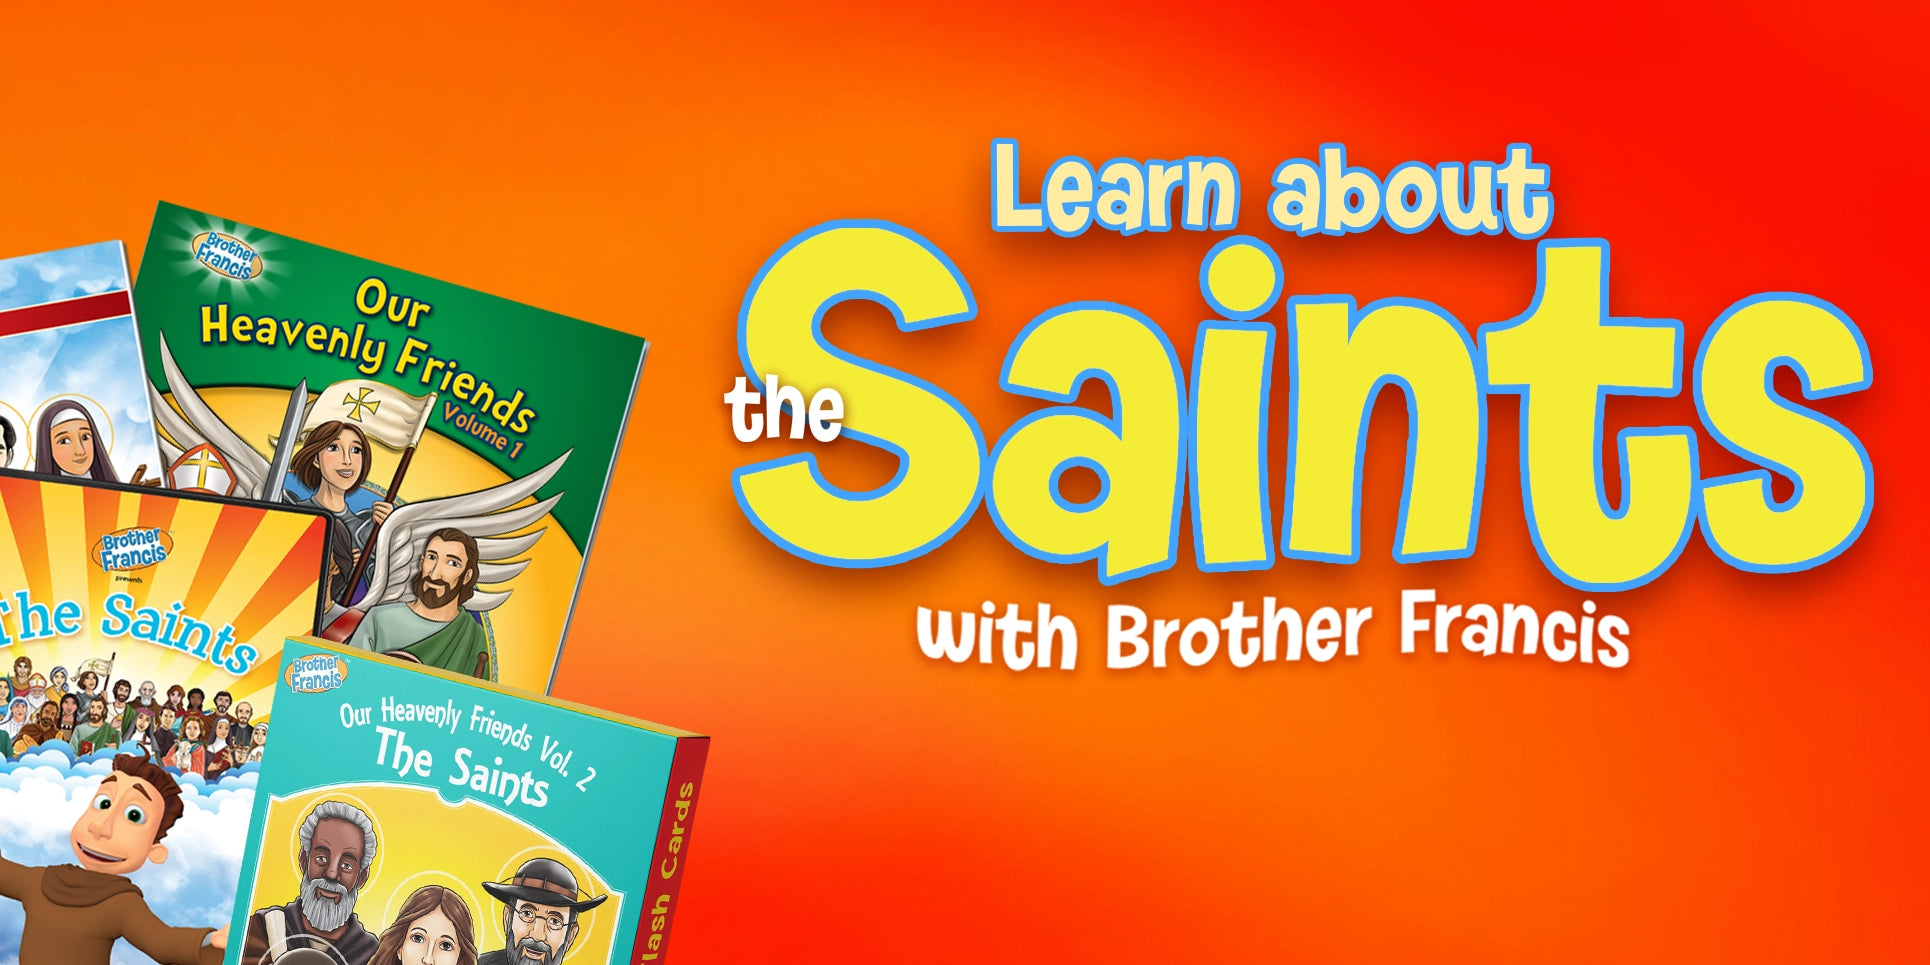 Learn about the Saints with Brother Francis